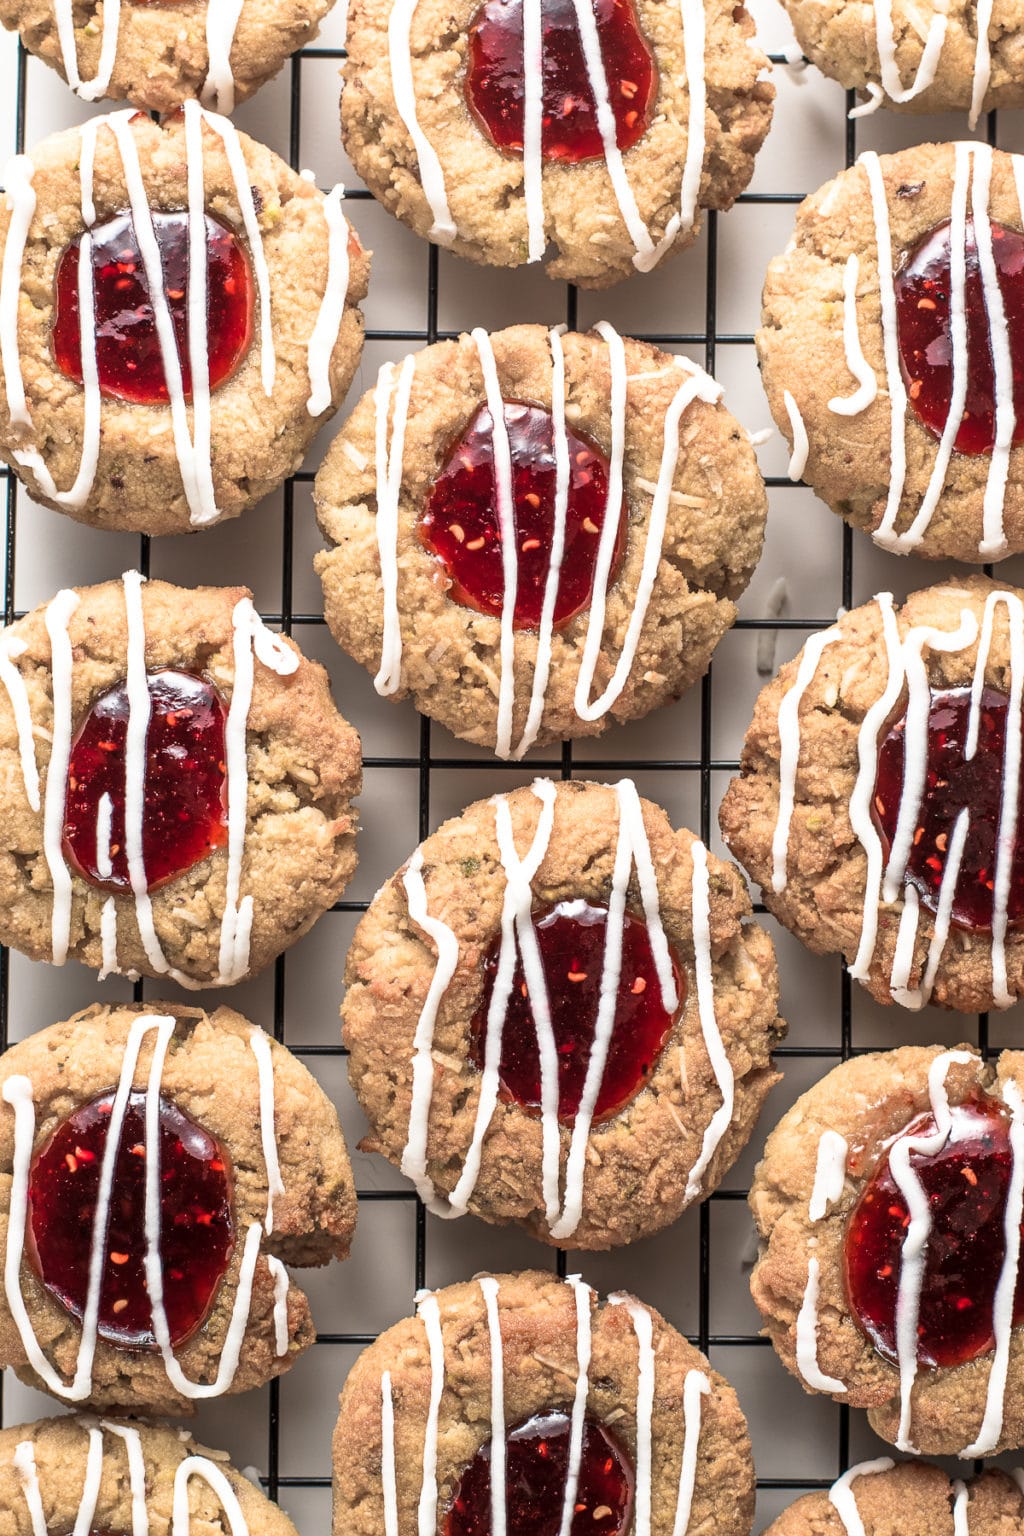 Resting on a white backdrop, is a metal cookie rack covered with raspberry jam-filled, thumbprint cookies drizzled with sugar-free, white glaze.